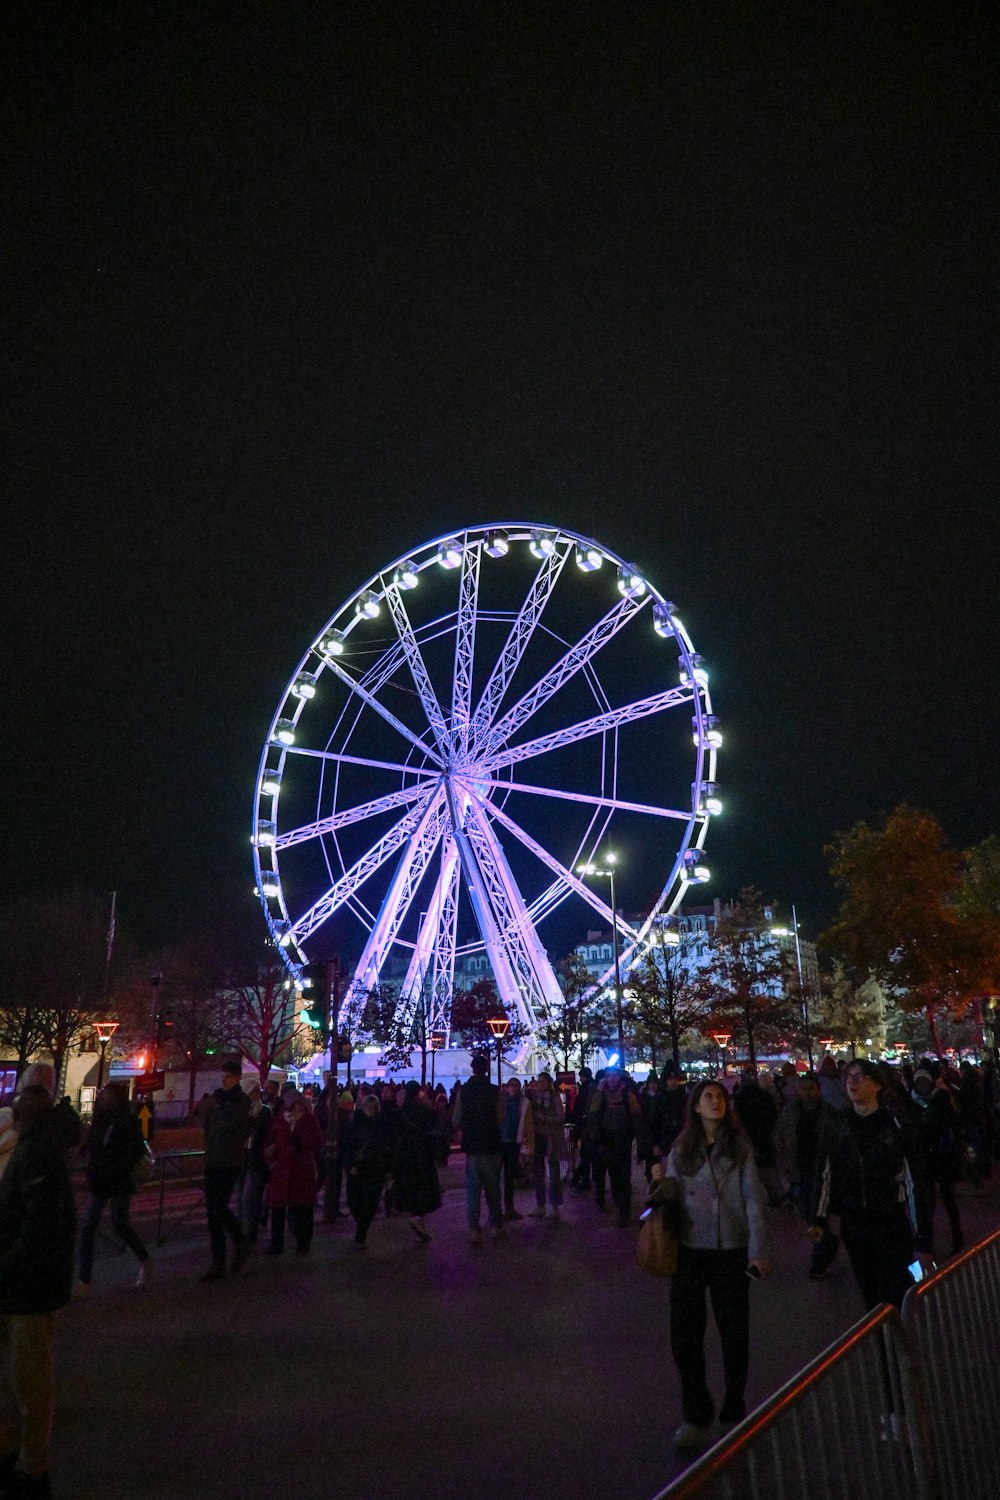 a crowd of people standing around a ferris wheel at night